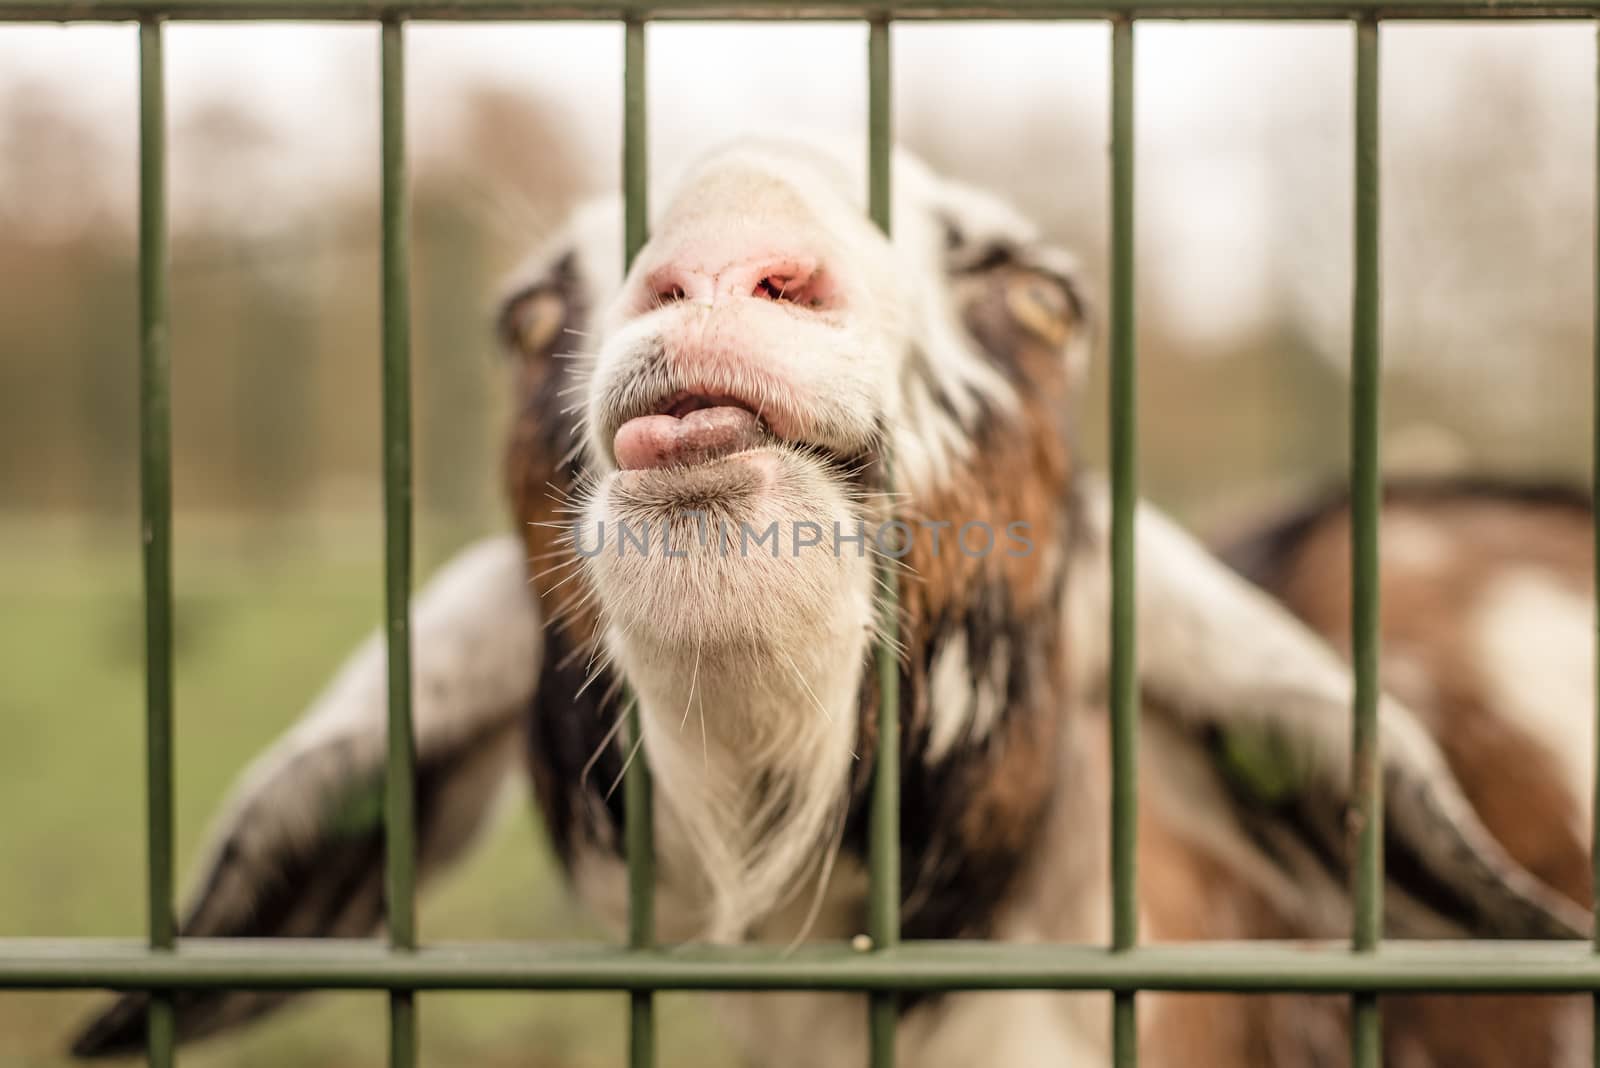 A goat sticks its nose through a fence, making a funny face by Pendleton